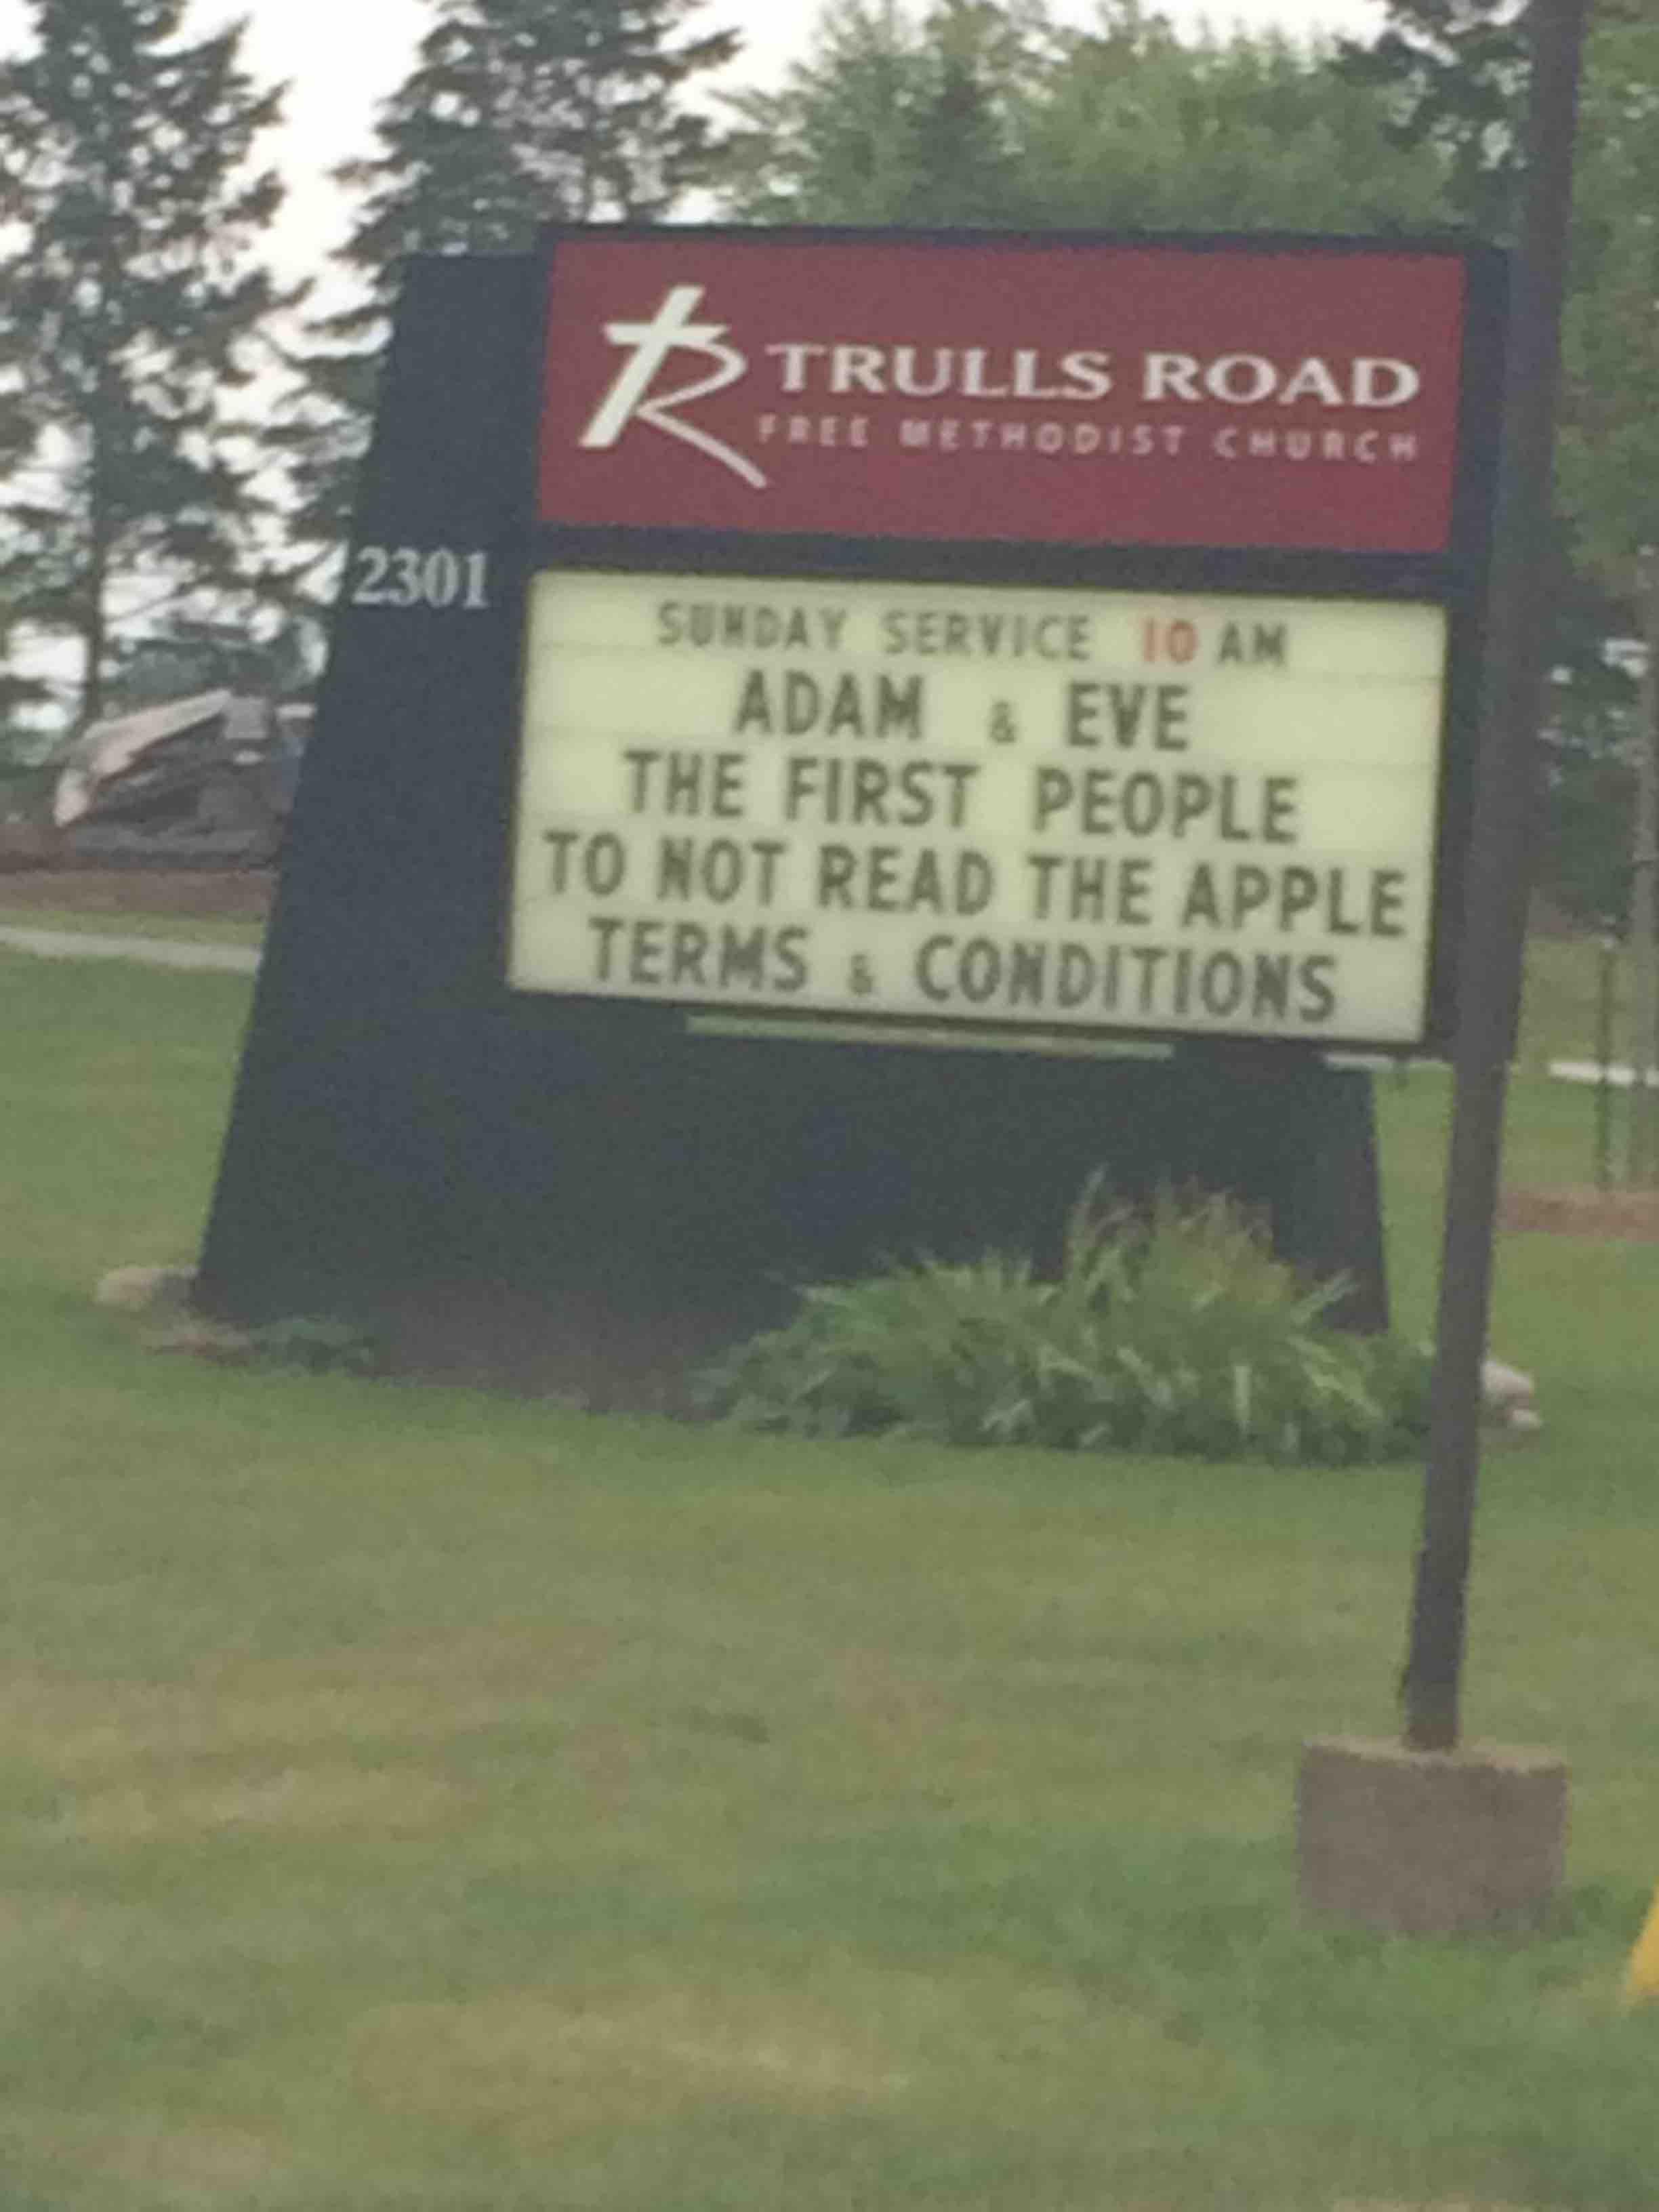 The first people to not read the Apple terms and conditions. - RealFunny